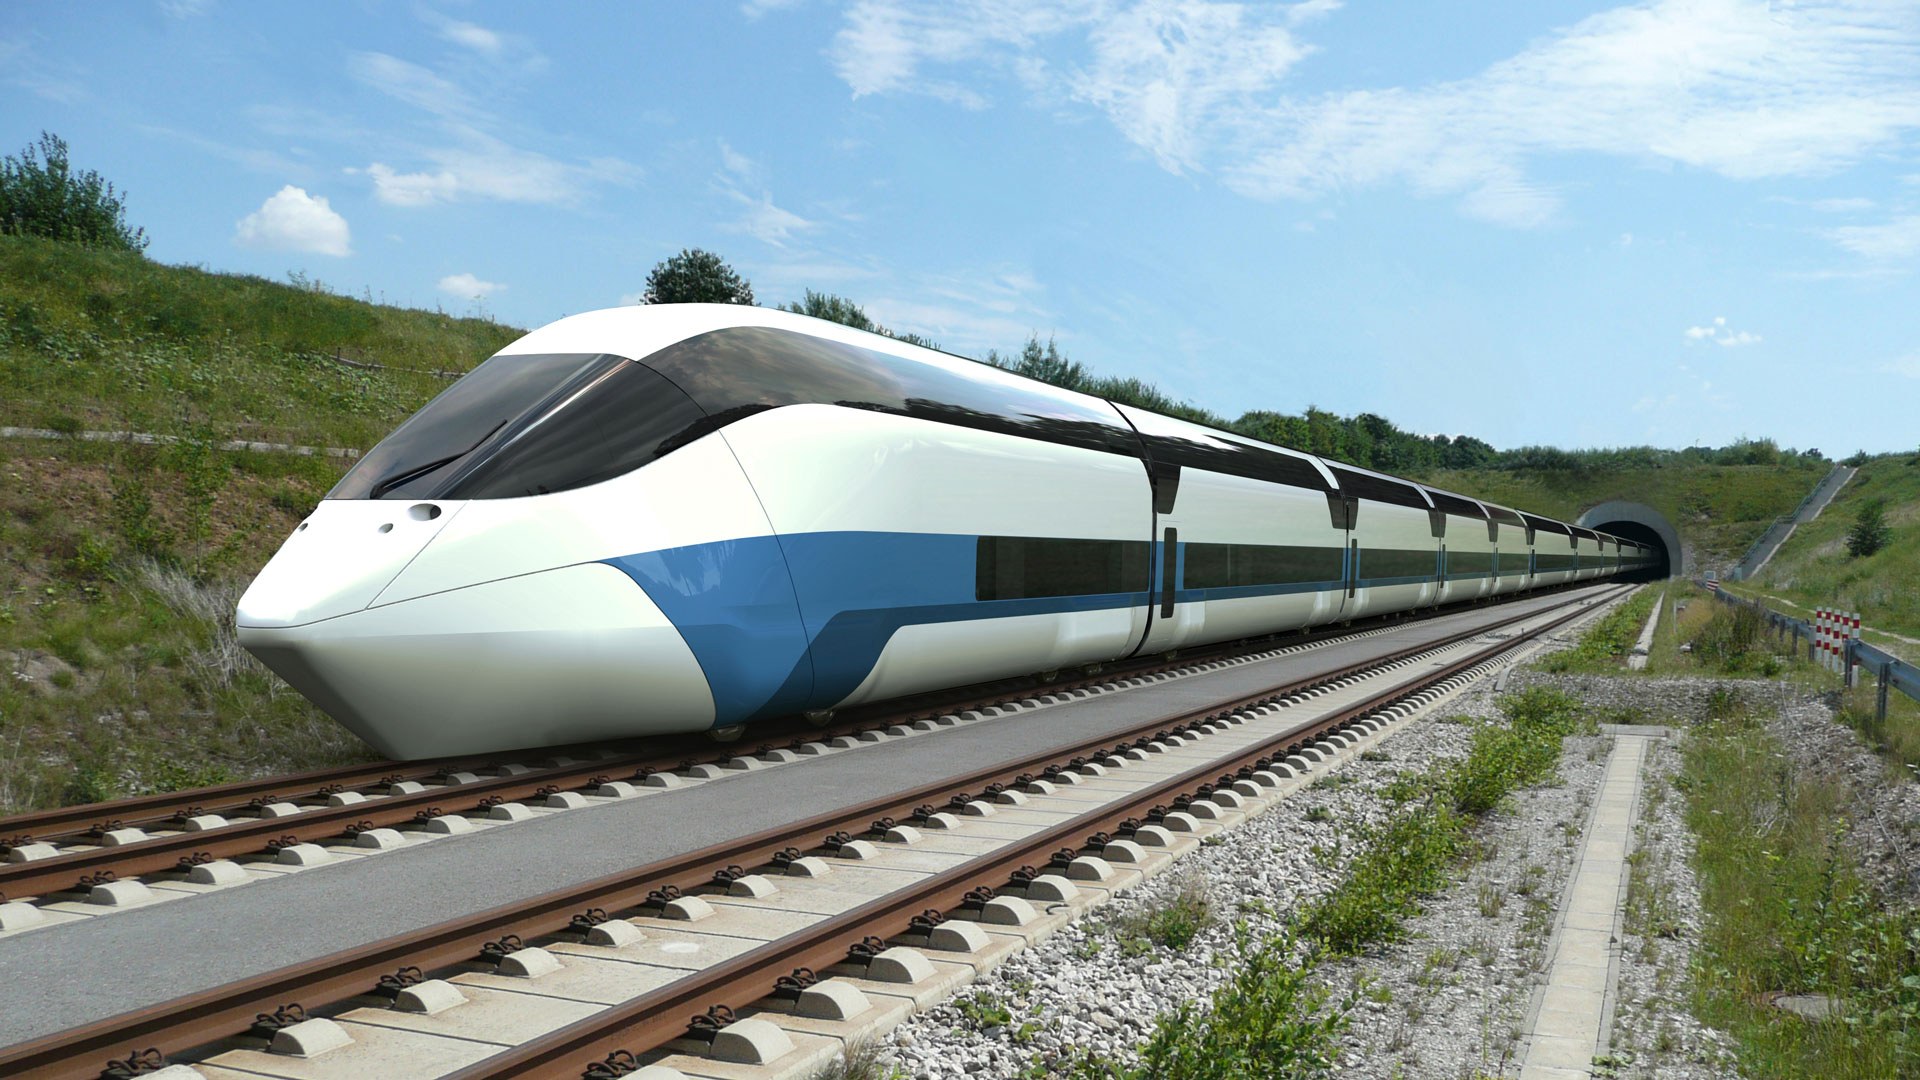 The NGT high-speed train